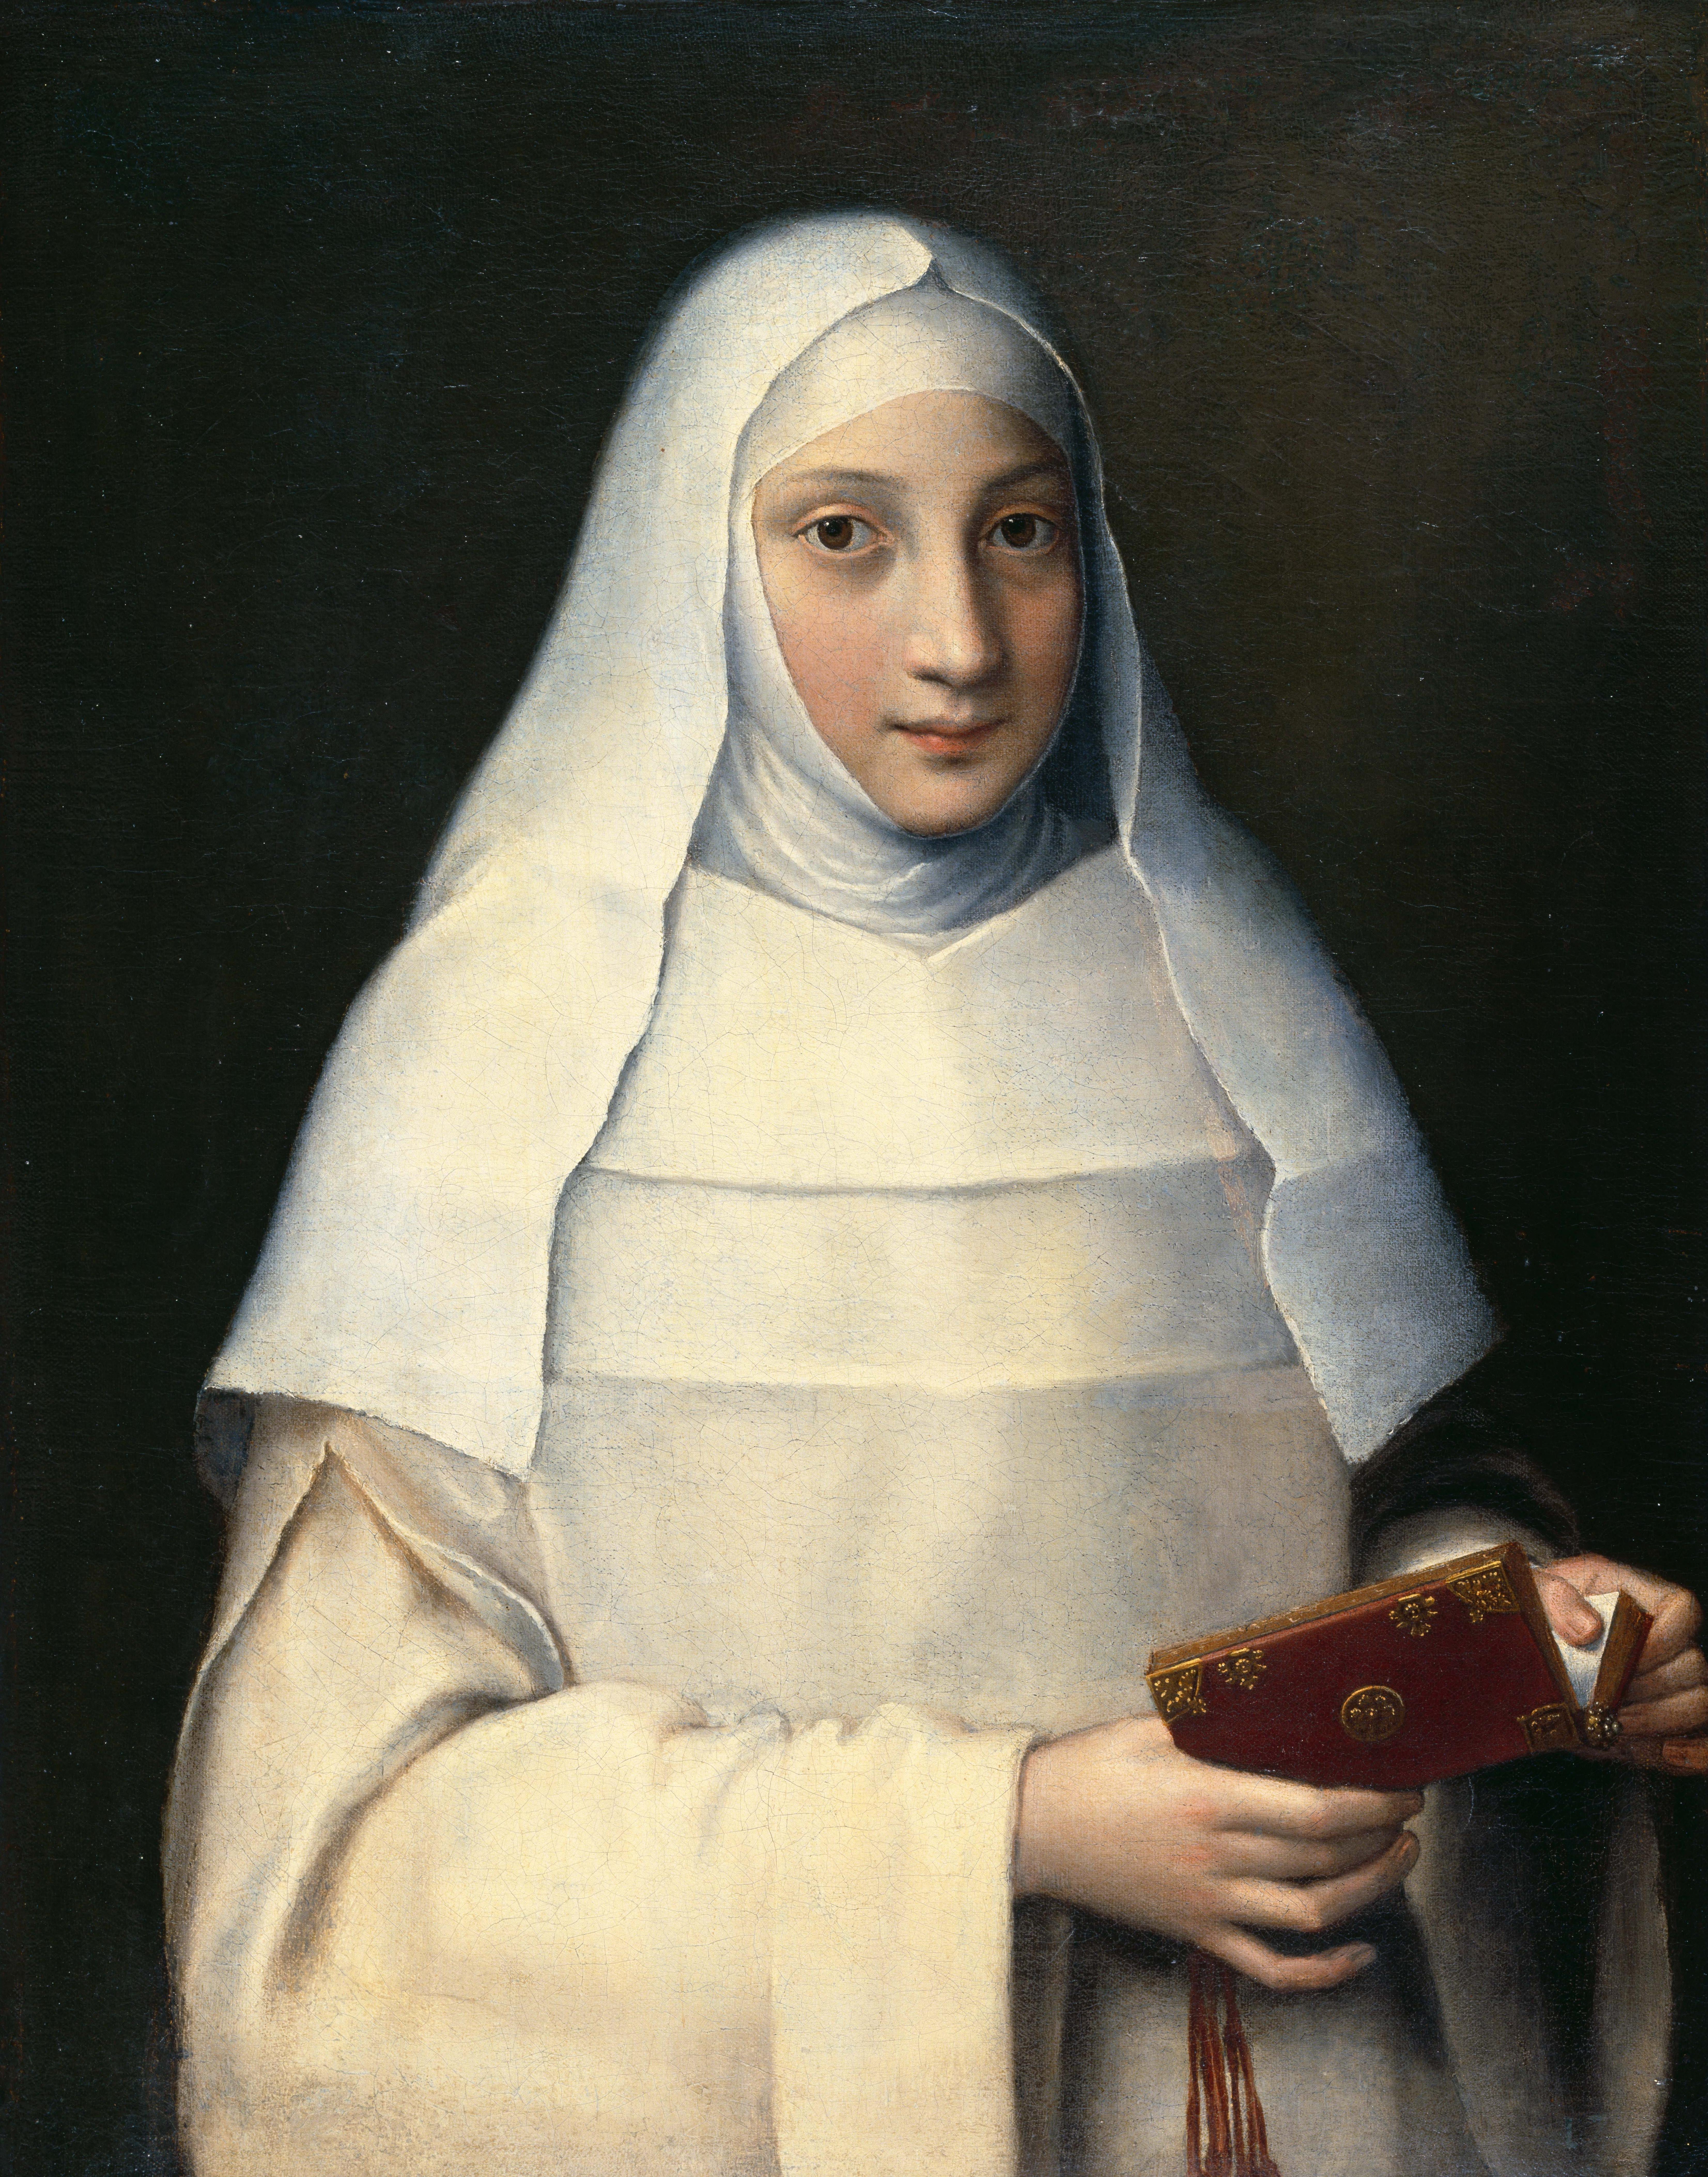 Sofonisba Anguissola (Italian, ca. 1535–1625), "The Artist’s Sister in the Garb of a Nun," 1551, Oil on canvas. Southampton City Art Gallery, Purchased in 1936 through the Chipperfield Bequest Fund, 1979/14